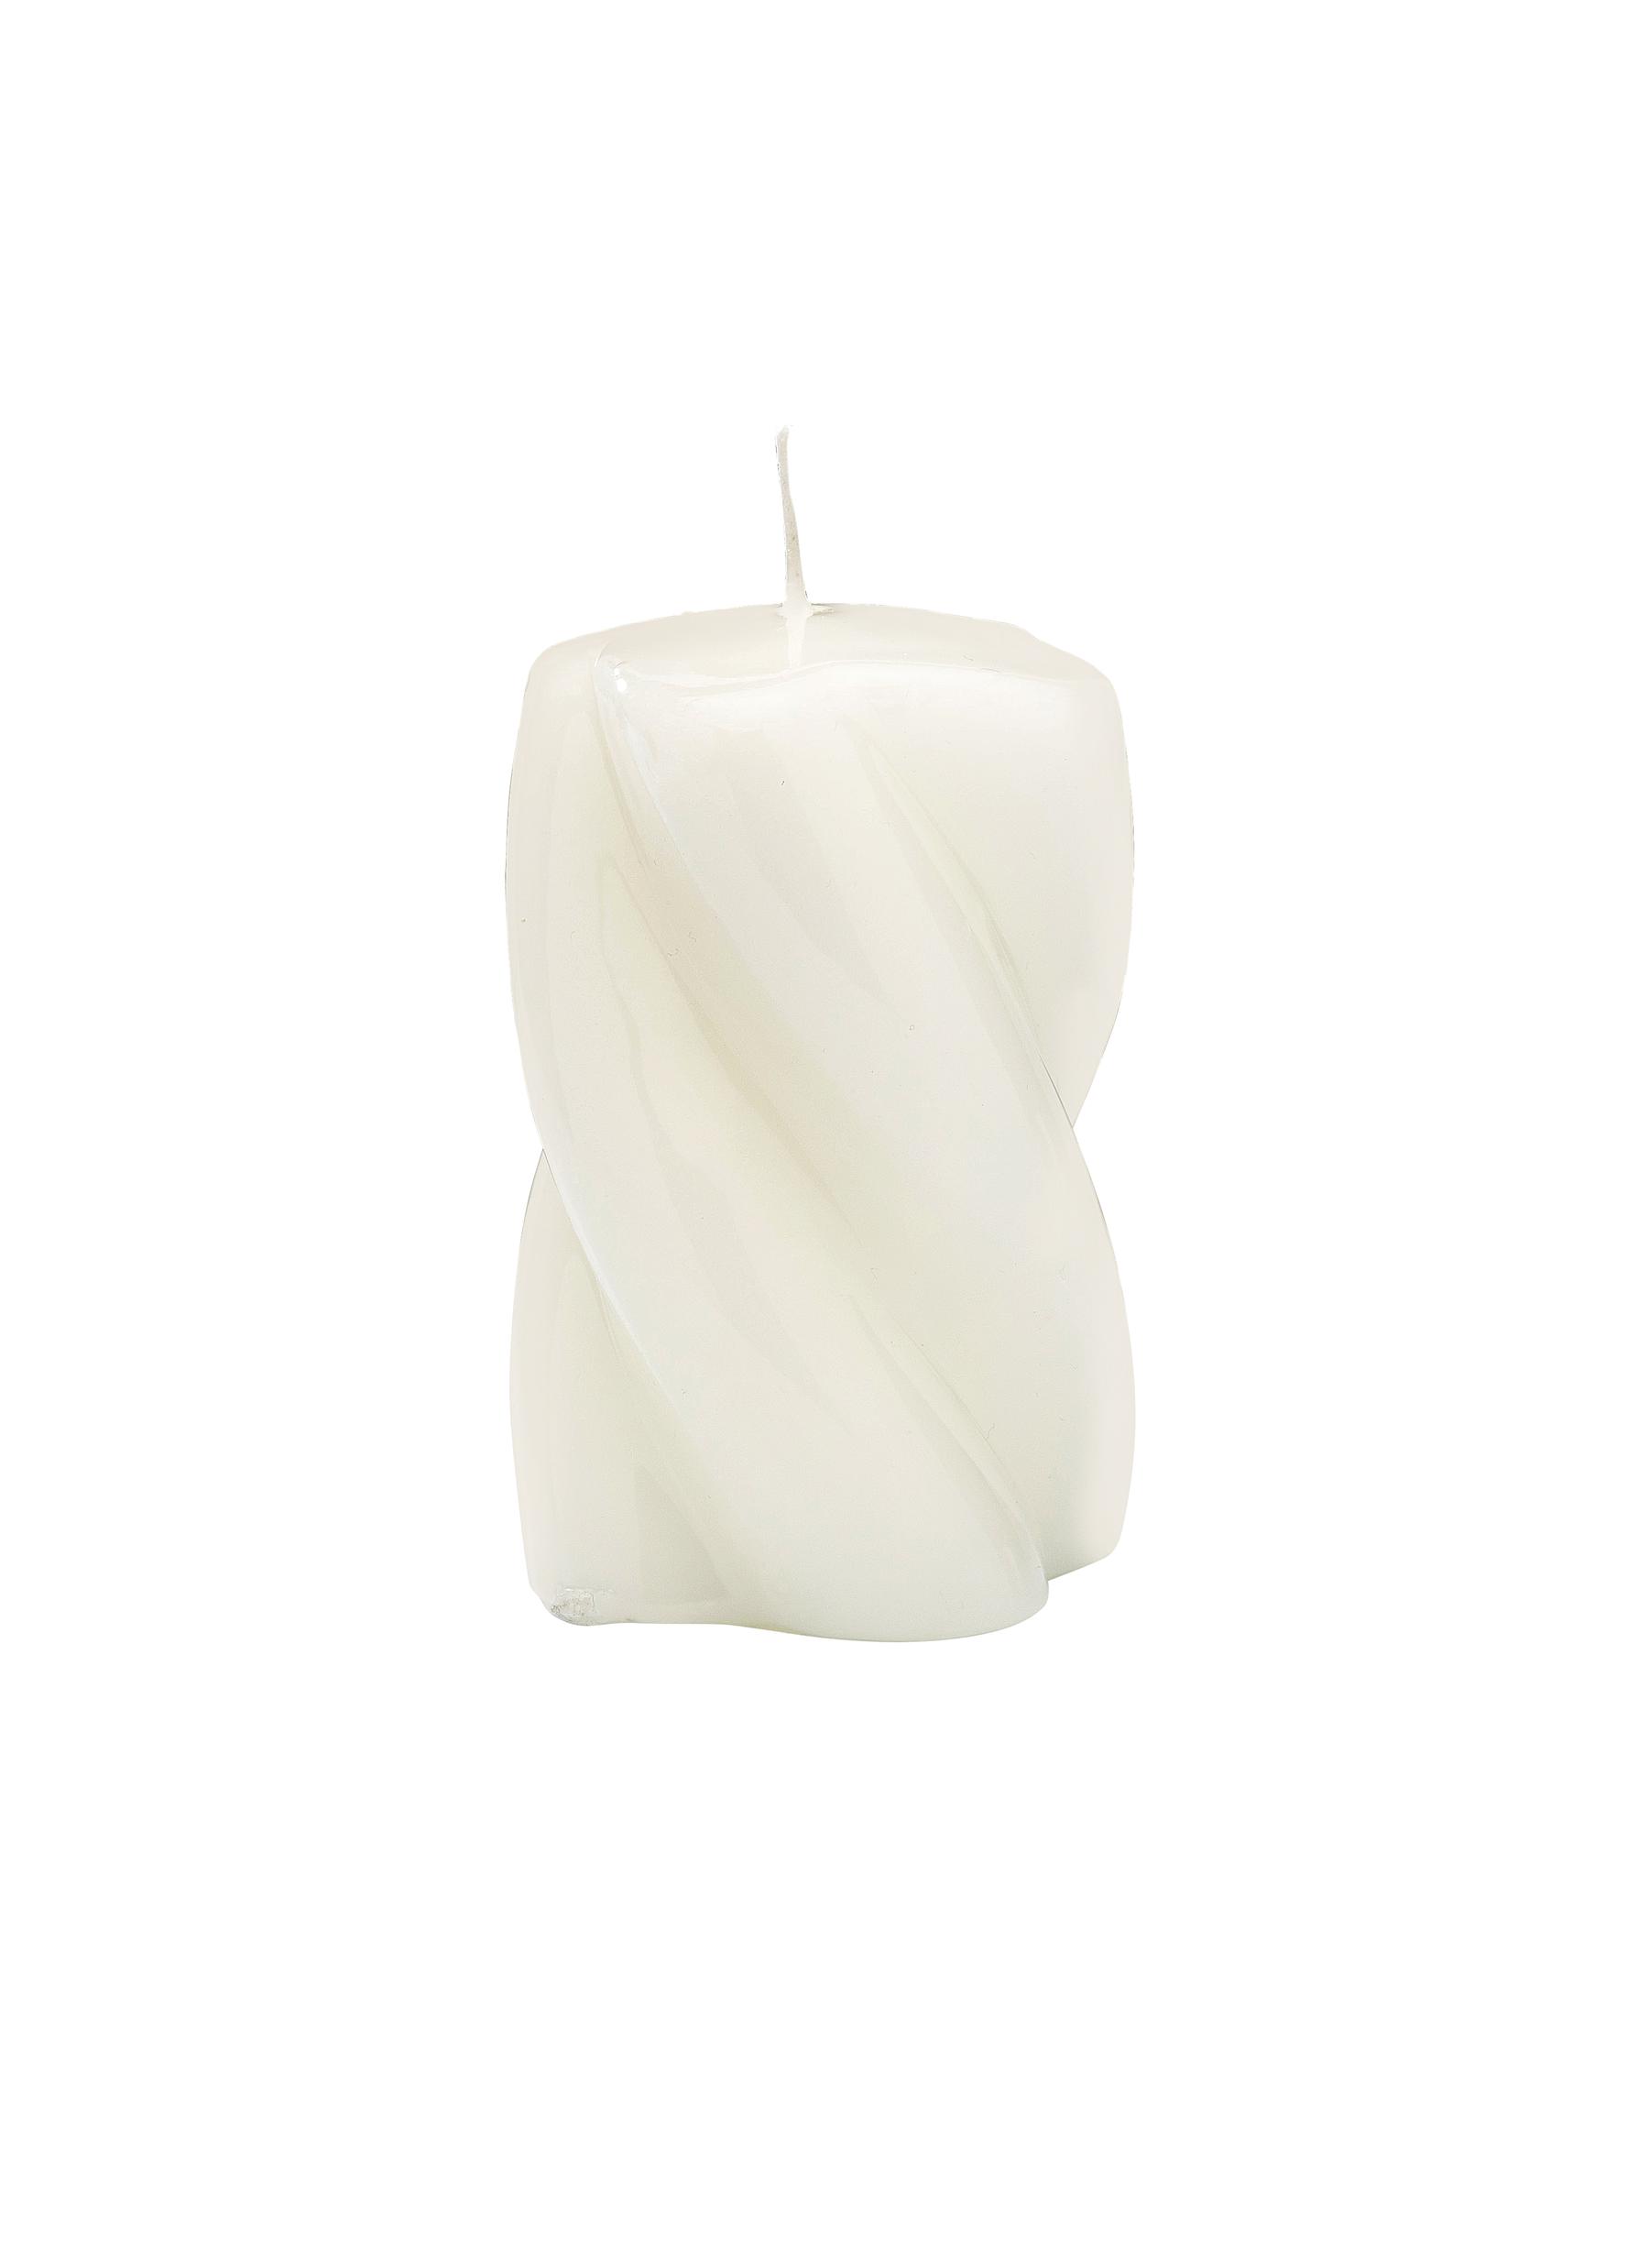 Anna + Nina Blunt Twisted Short Candle - White